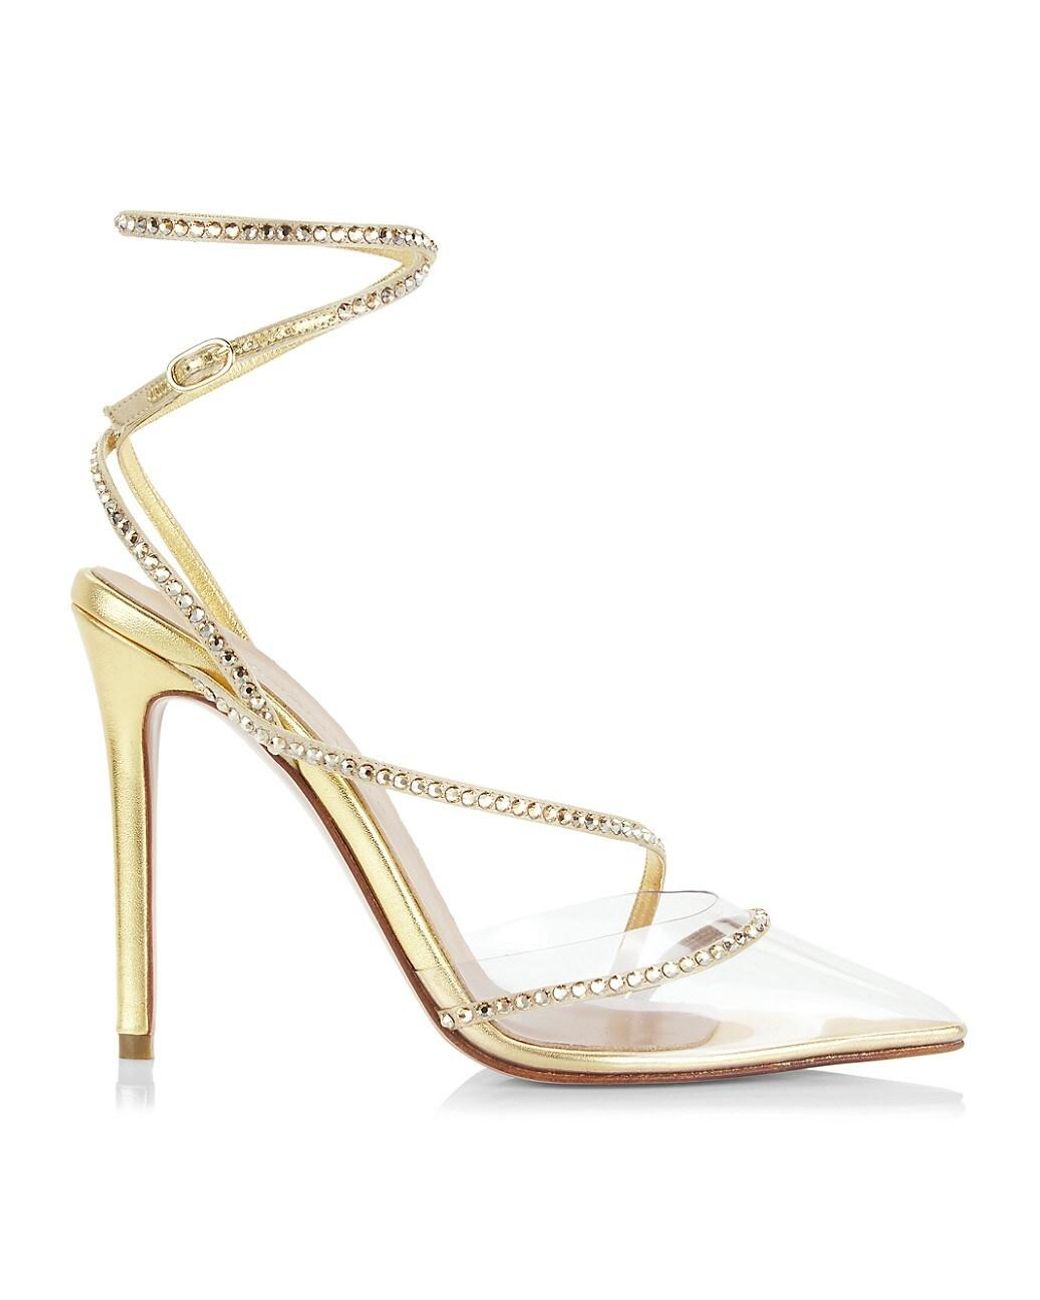 Andrea Wazen Dassy Sunset Leather & Crystal Pumps in Gold (Metallic) | Lyst